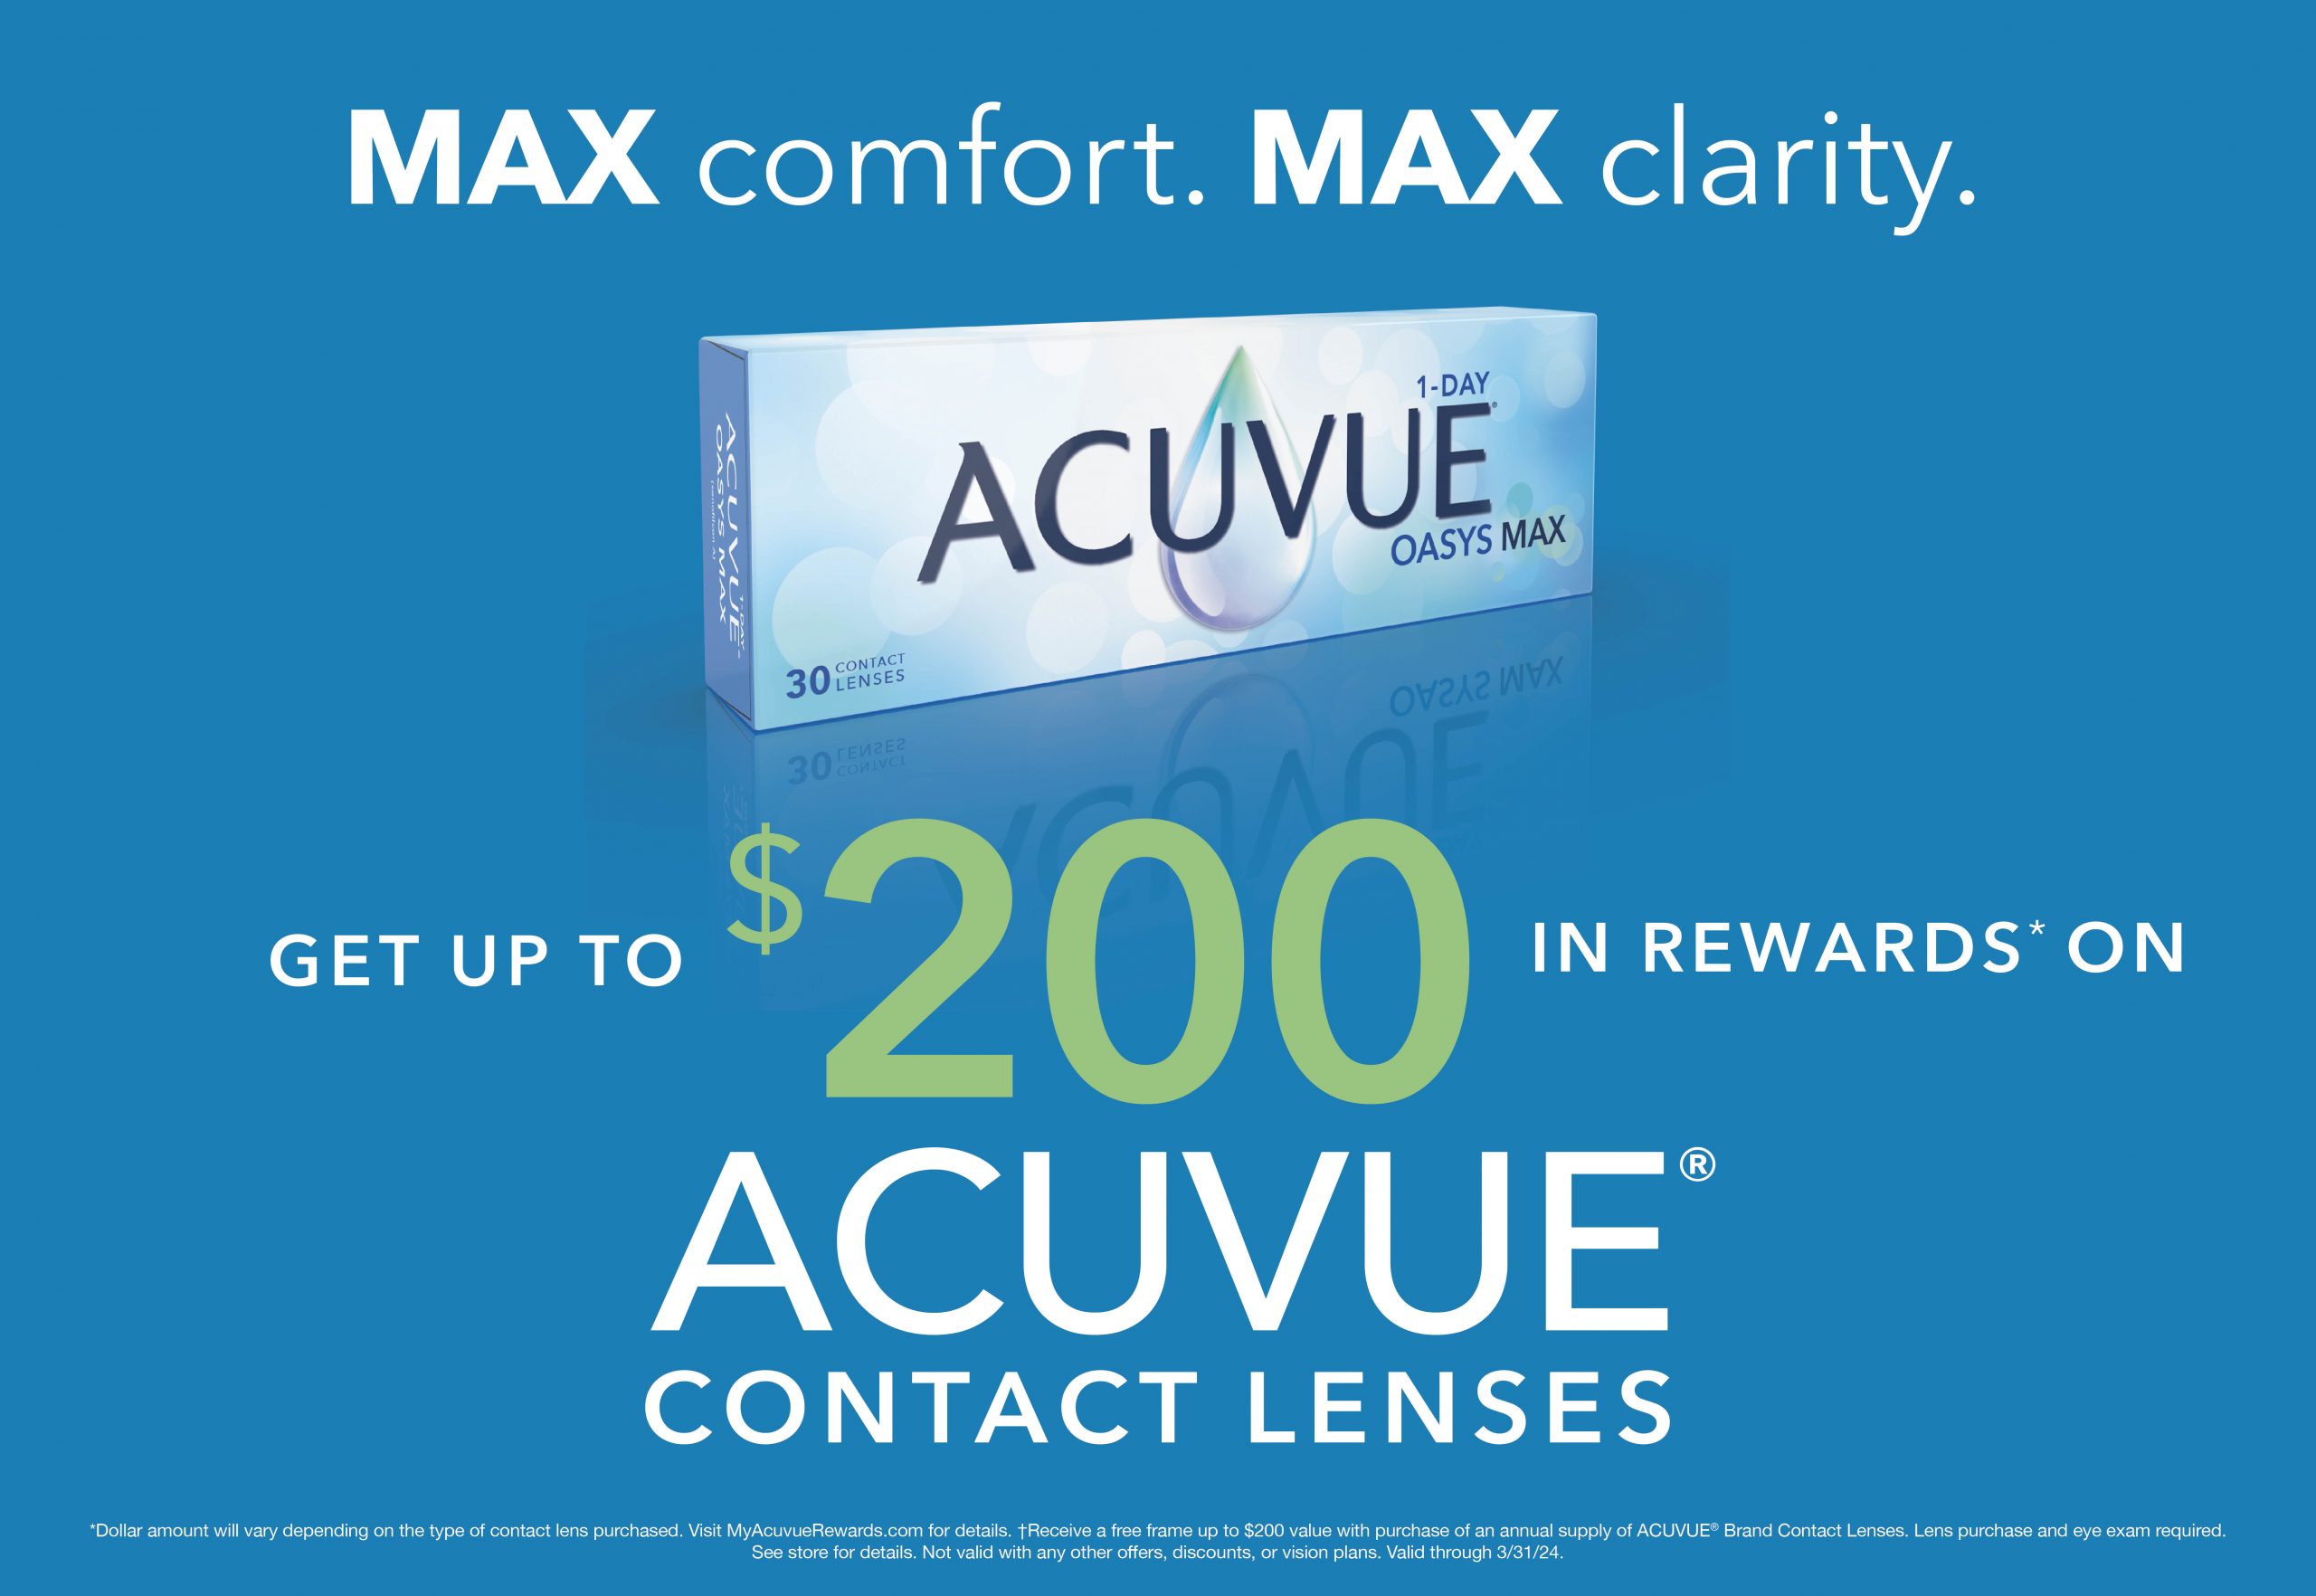 Text: MAX comfort. MAX clarity. Get up to $200 in Rewards* on Acuvue ® contact lenses *Dollar amount will vary depending on the type of contact lens purchased. Visit MyAcuvueRewards.com for details. † Receive a free frame up to $200 value with purchase of an annual supply of ACUVUE® Brand Contact Lenses. Lens purchase and eye exam required. See store for details. Not valid with any other offers, discounts, or vision plans. Valid through 3/31/24. Photo: Blue background with Acuvue Oasys Max 1-Day contact lens box